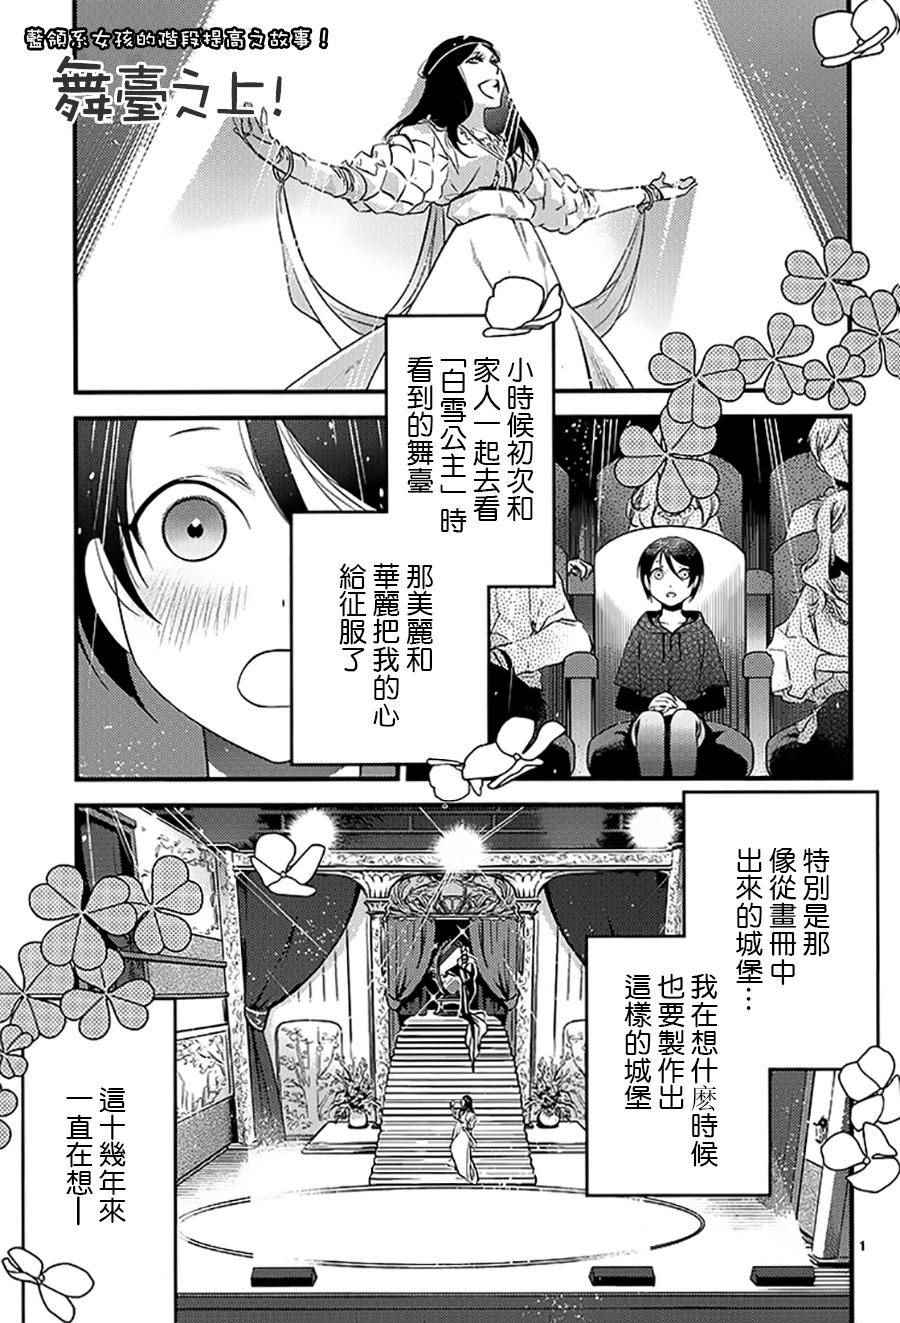 《On Stage》漫画 001集